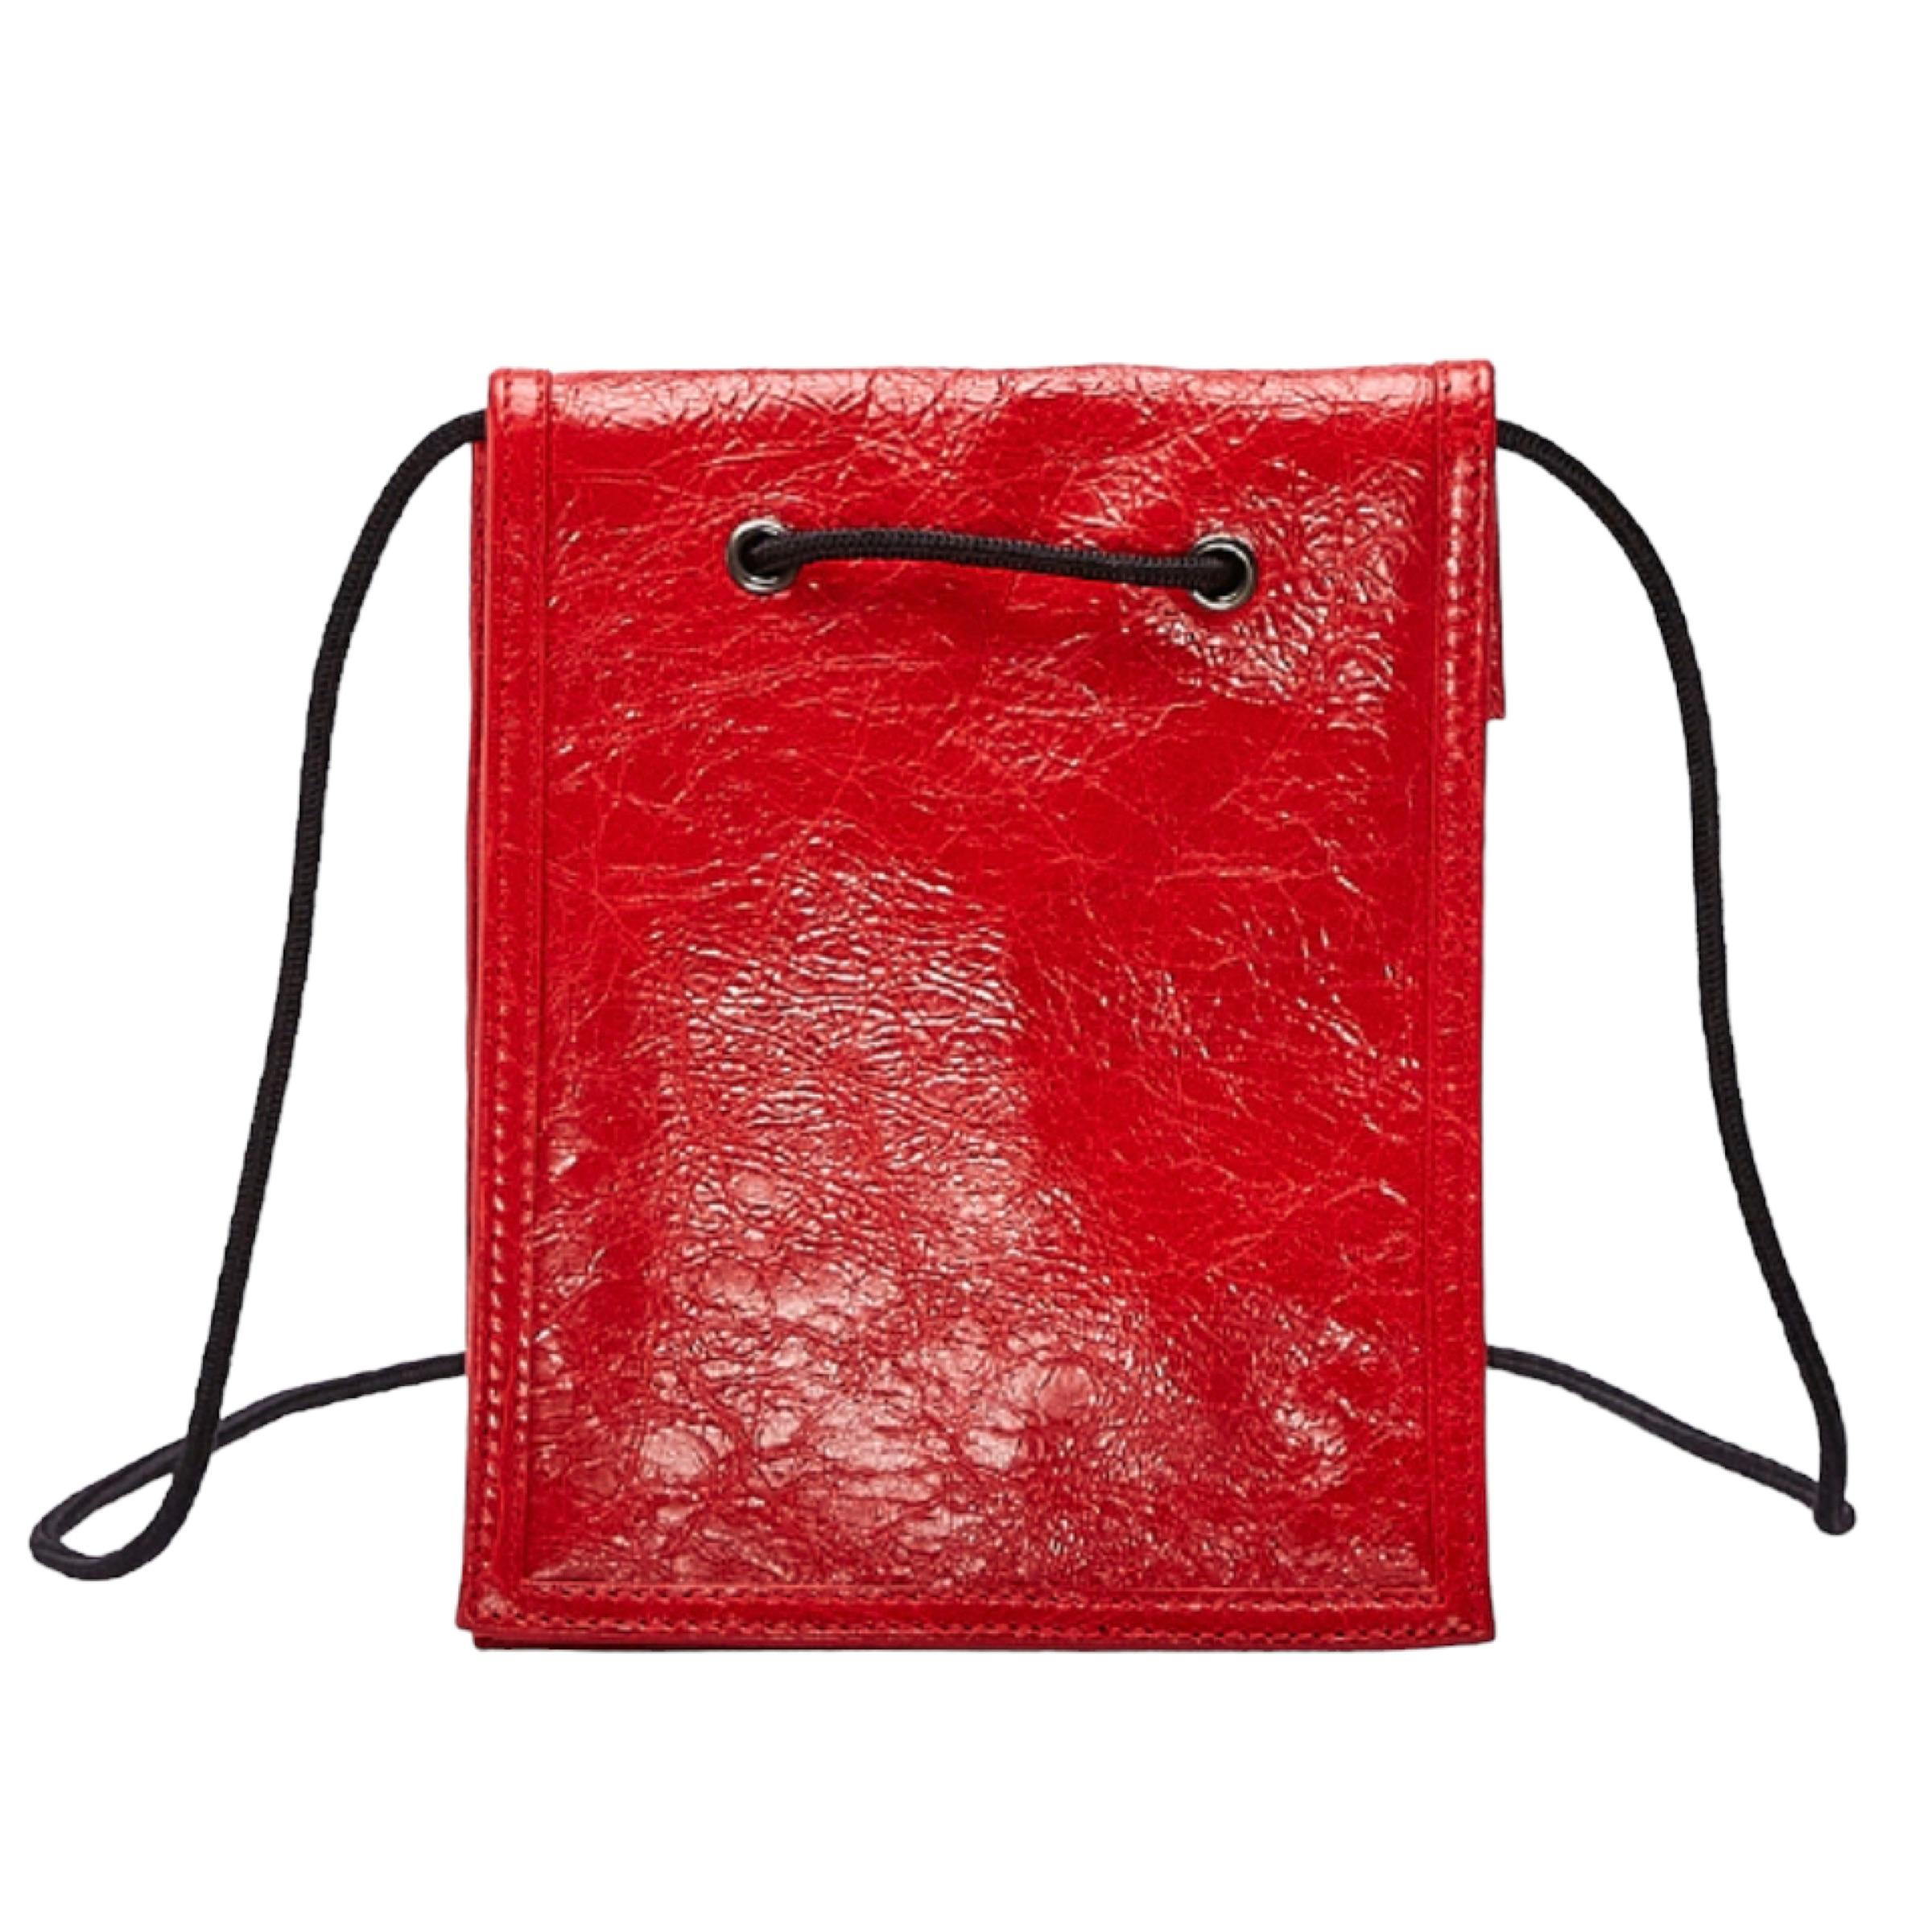 NEW Balenciaga Red Explorer Cracked Leather Pouch Crossbody Bag For Sale 2